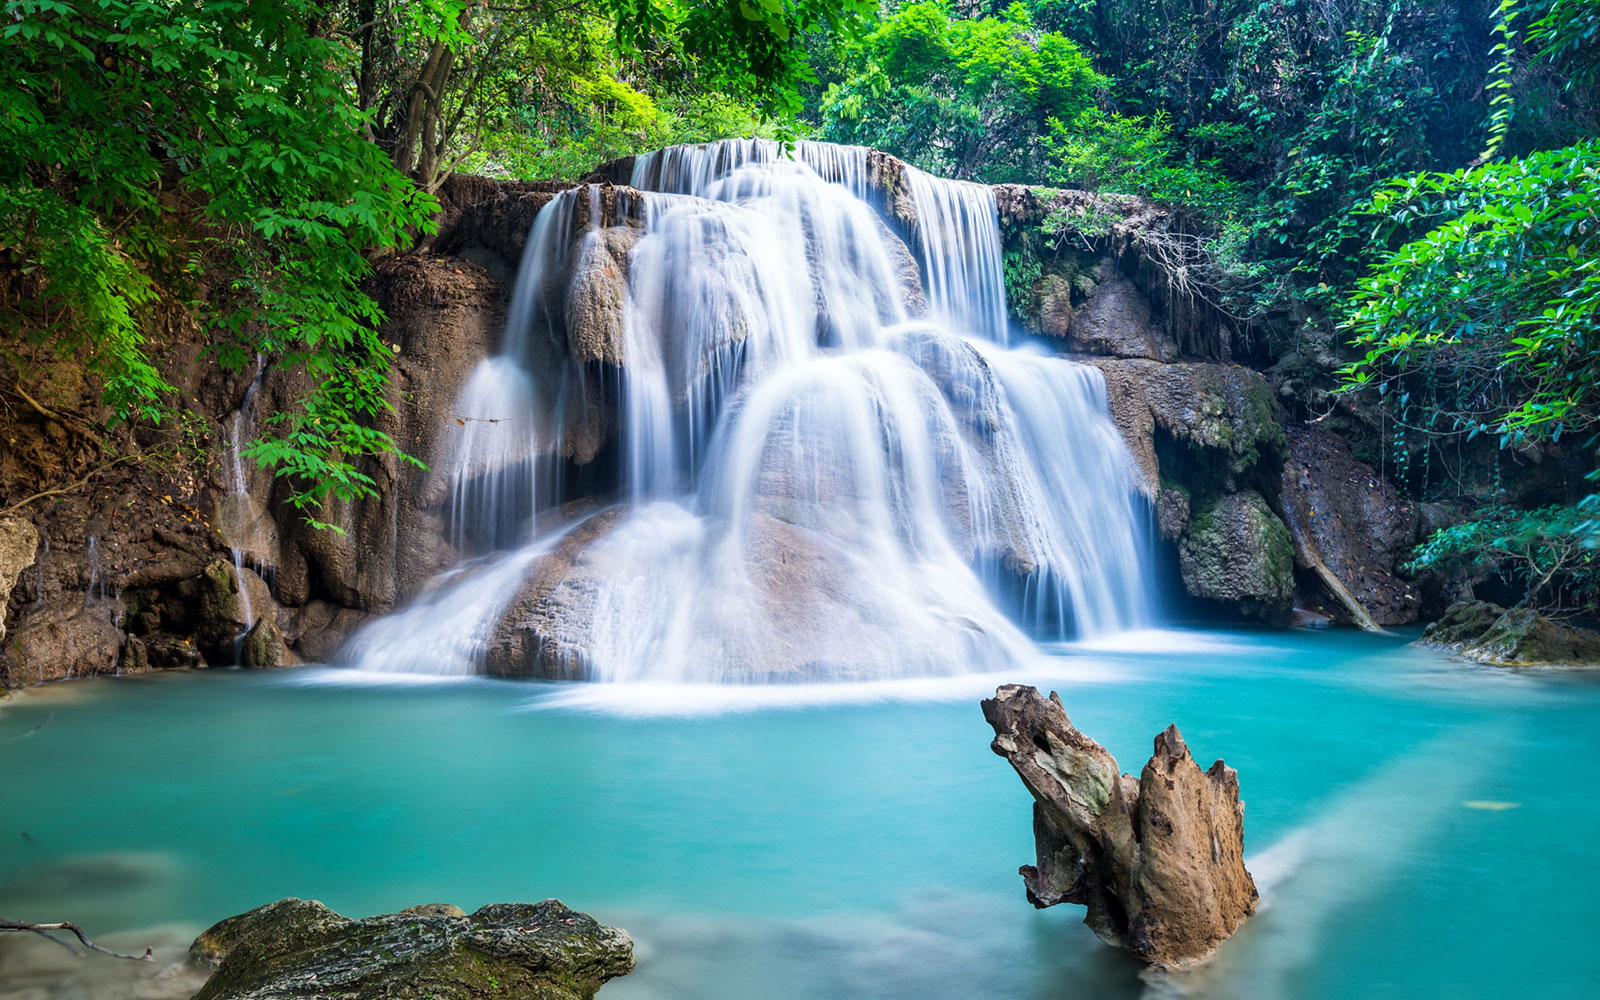 The turquoise waterfall